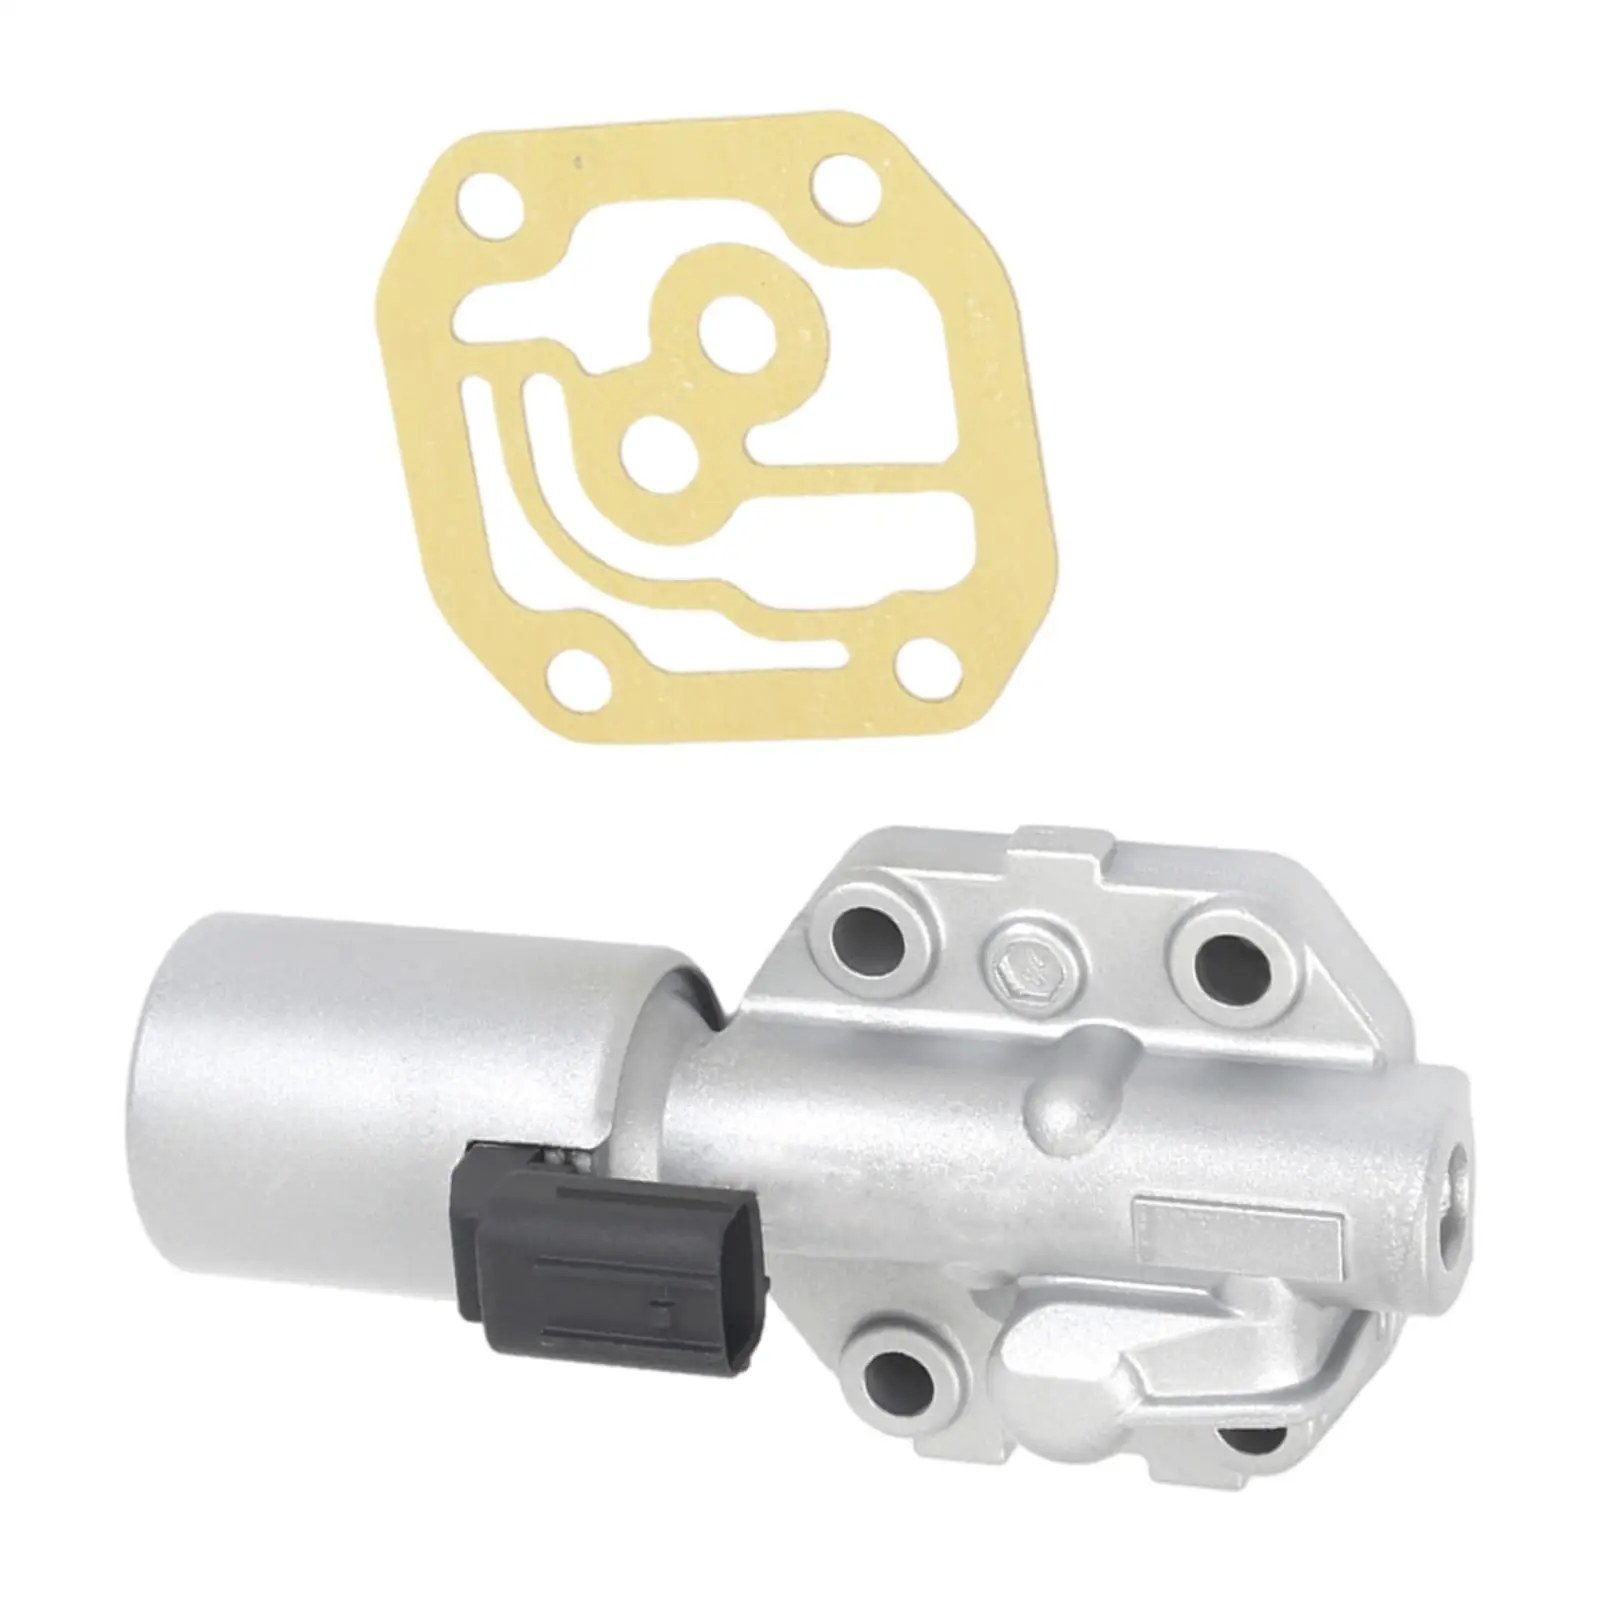 Transmission Solenoid Fits for   for Accord, for , 2002-2011  Fitment